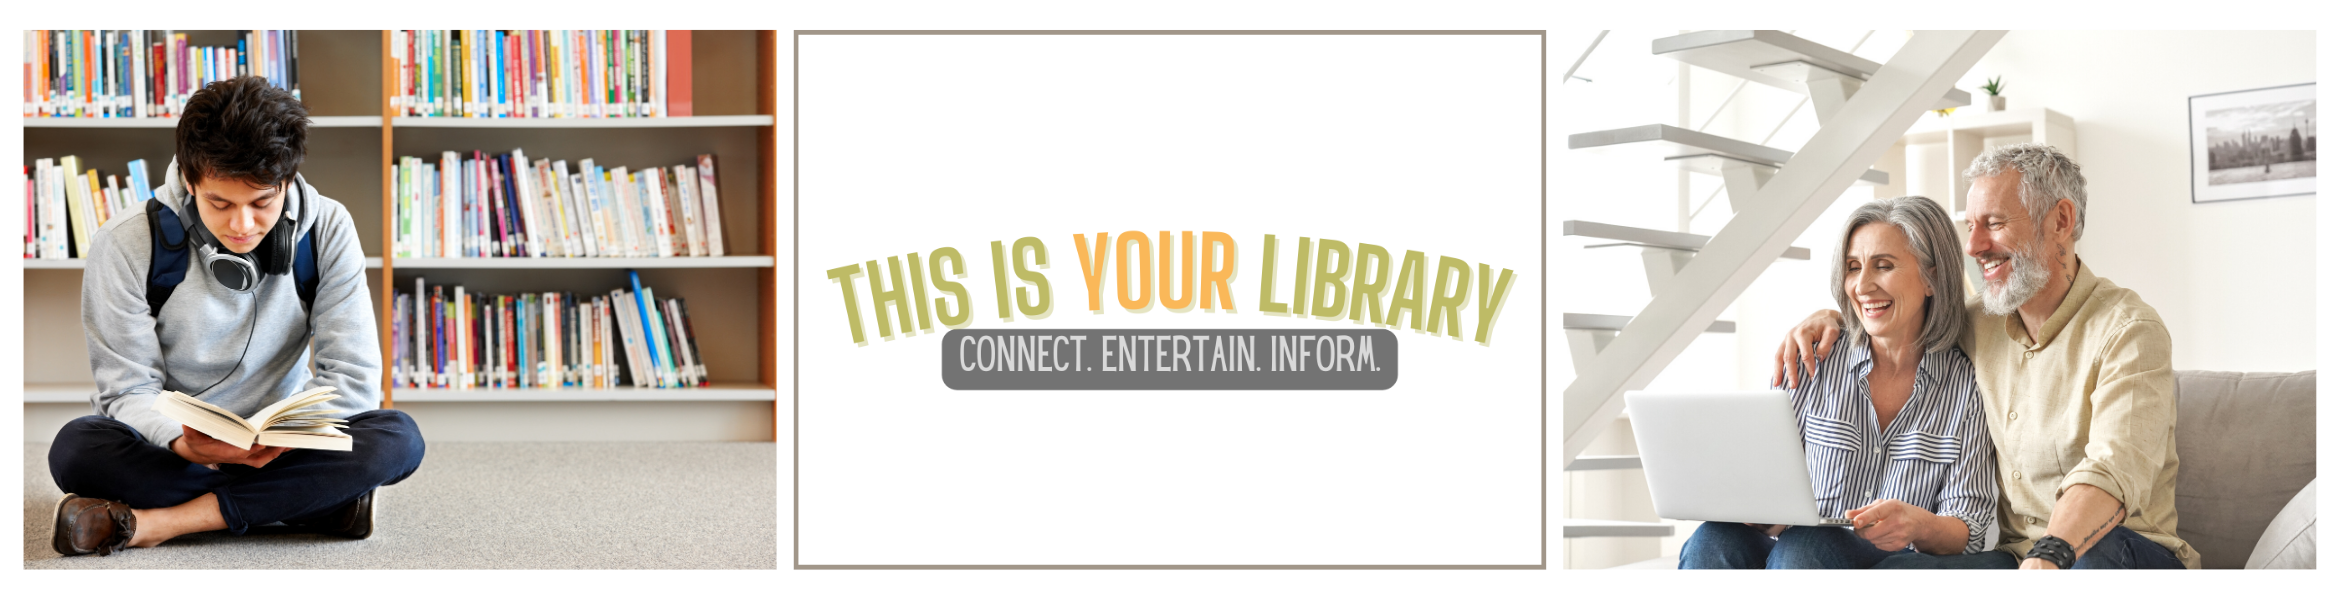 This is Your Library Web